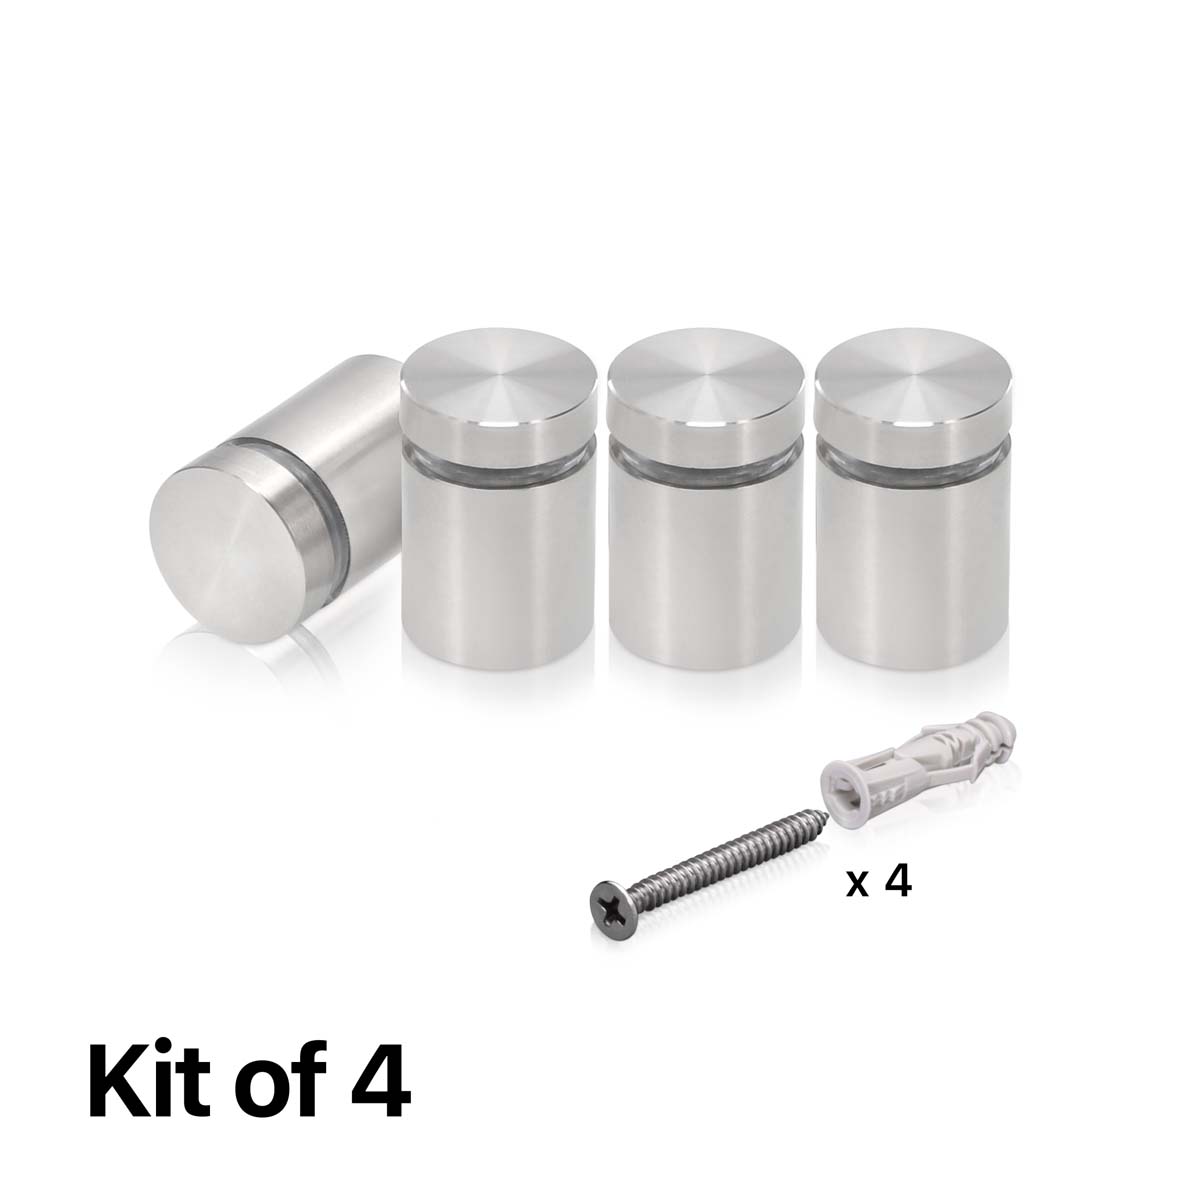 (Set of 4) 3/4'' Diameter X 3/4'' Barrel Length, Hollow Stainless Steel Brushed Finish. Easy Fasten Standoff with (4) 2216Z Screws and (4) LANC1 Anchors for concrete or drywall (For Inside Use Only) [Required Material Hole Size: 7/16'']